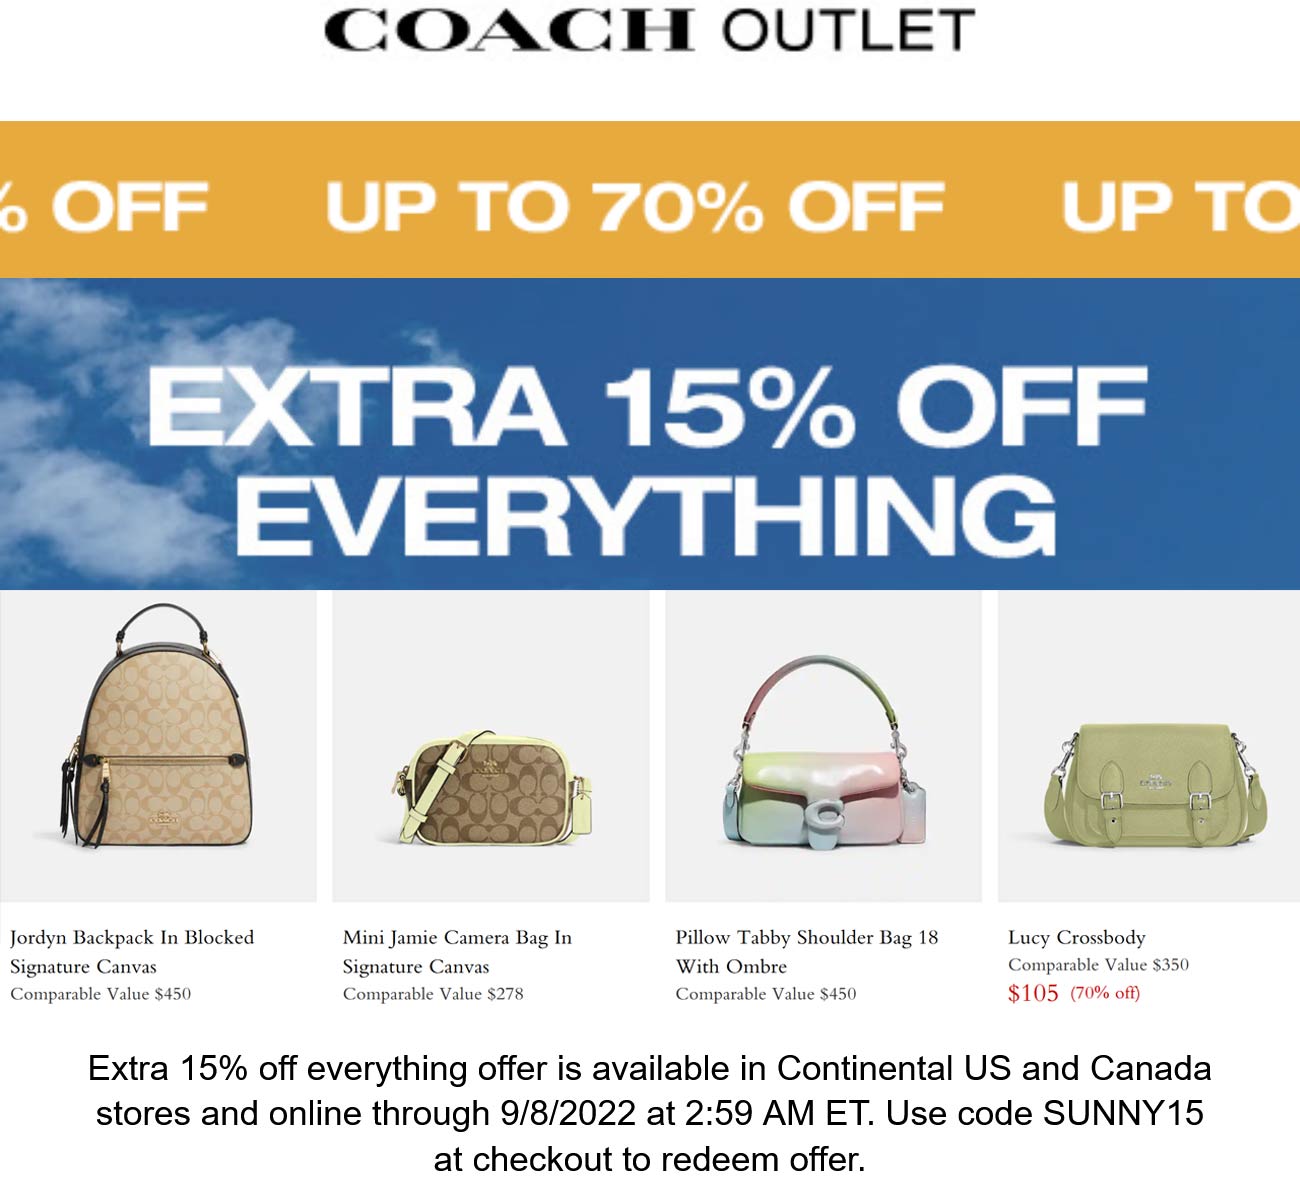 Coach Outlet coupons & promo code for [February 2023]